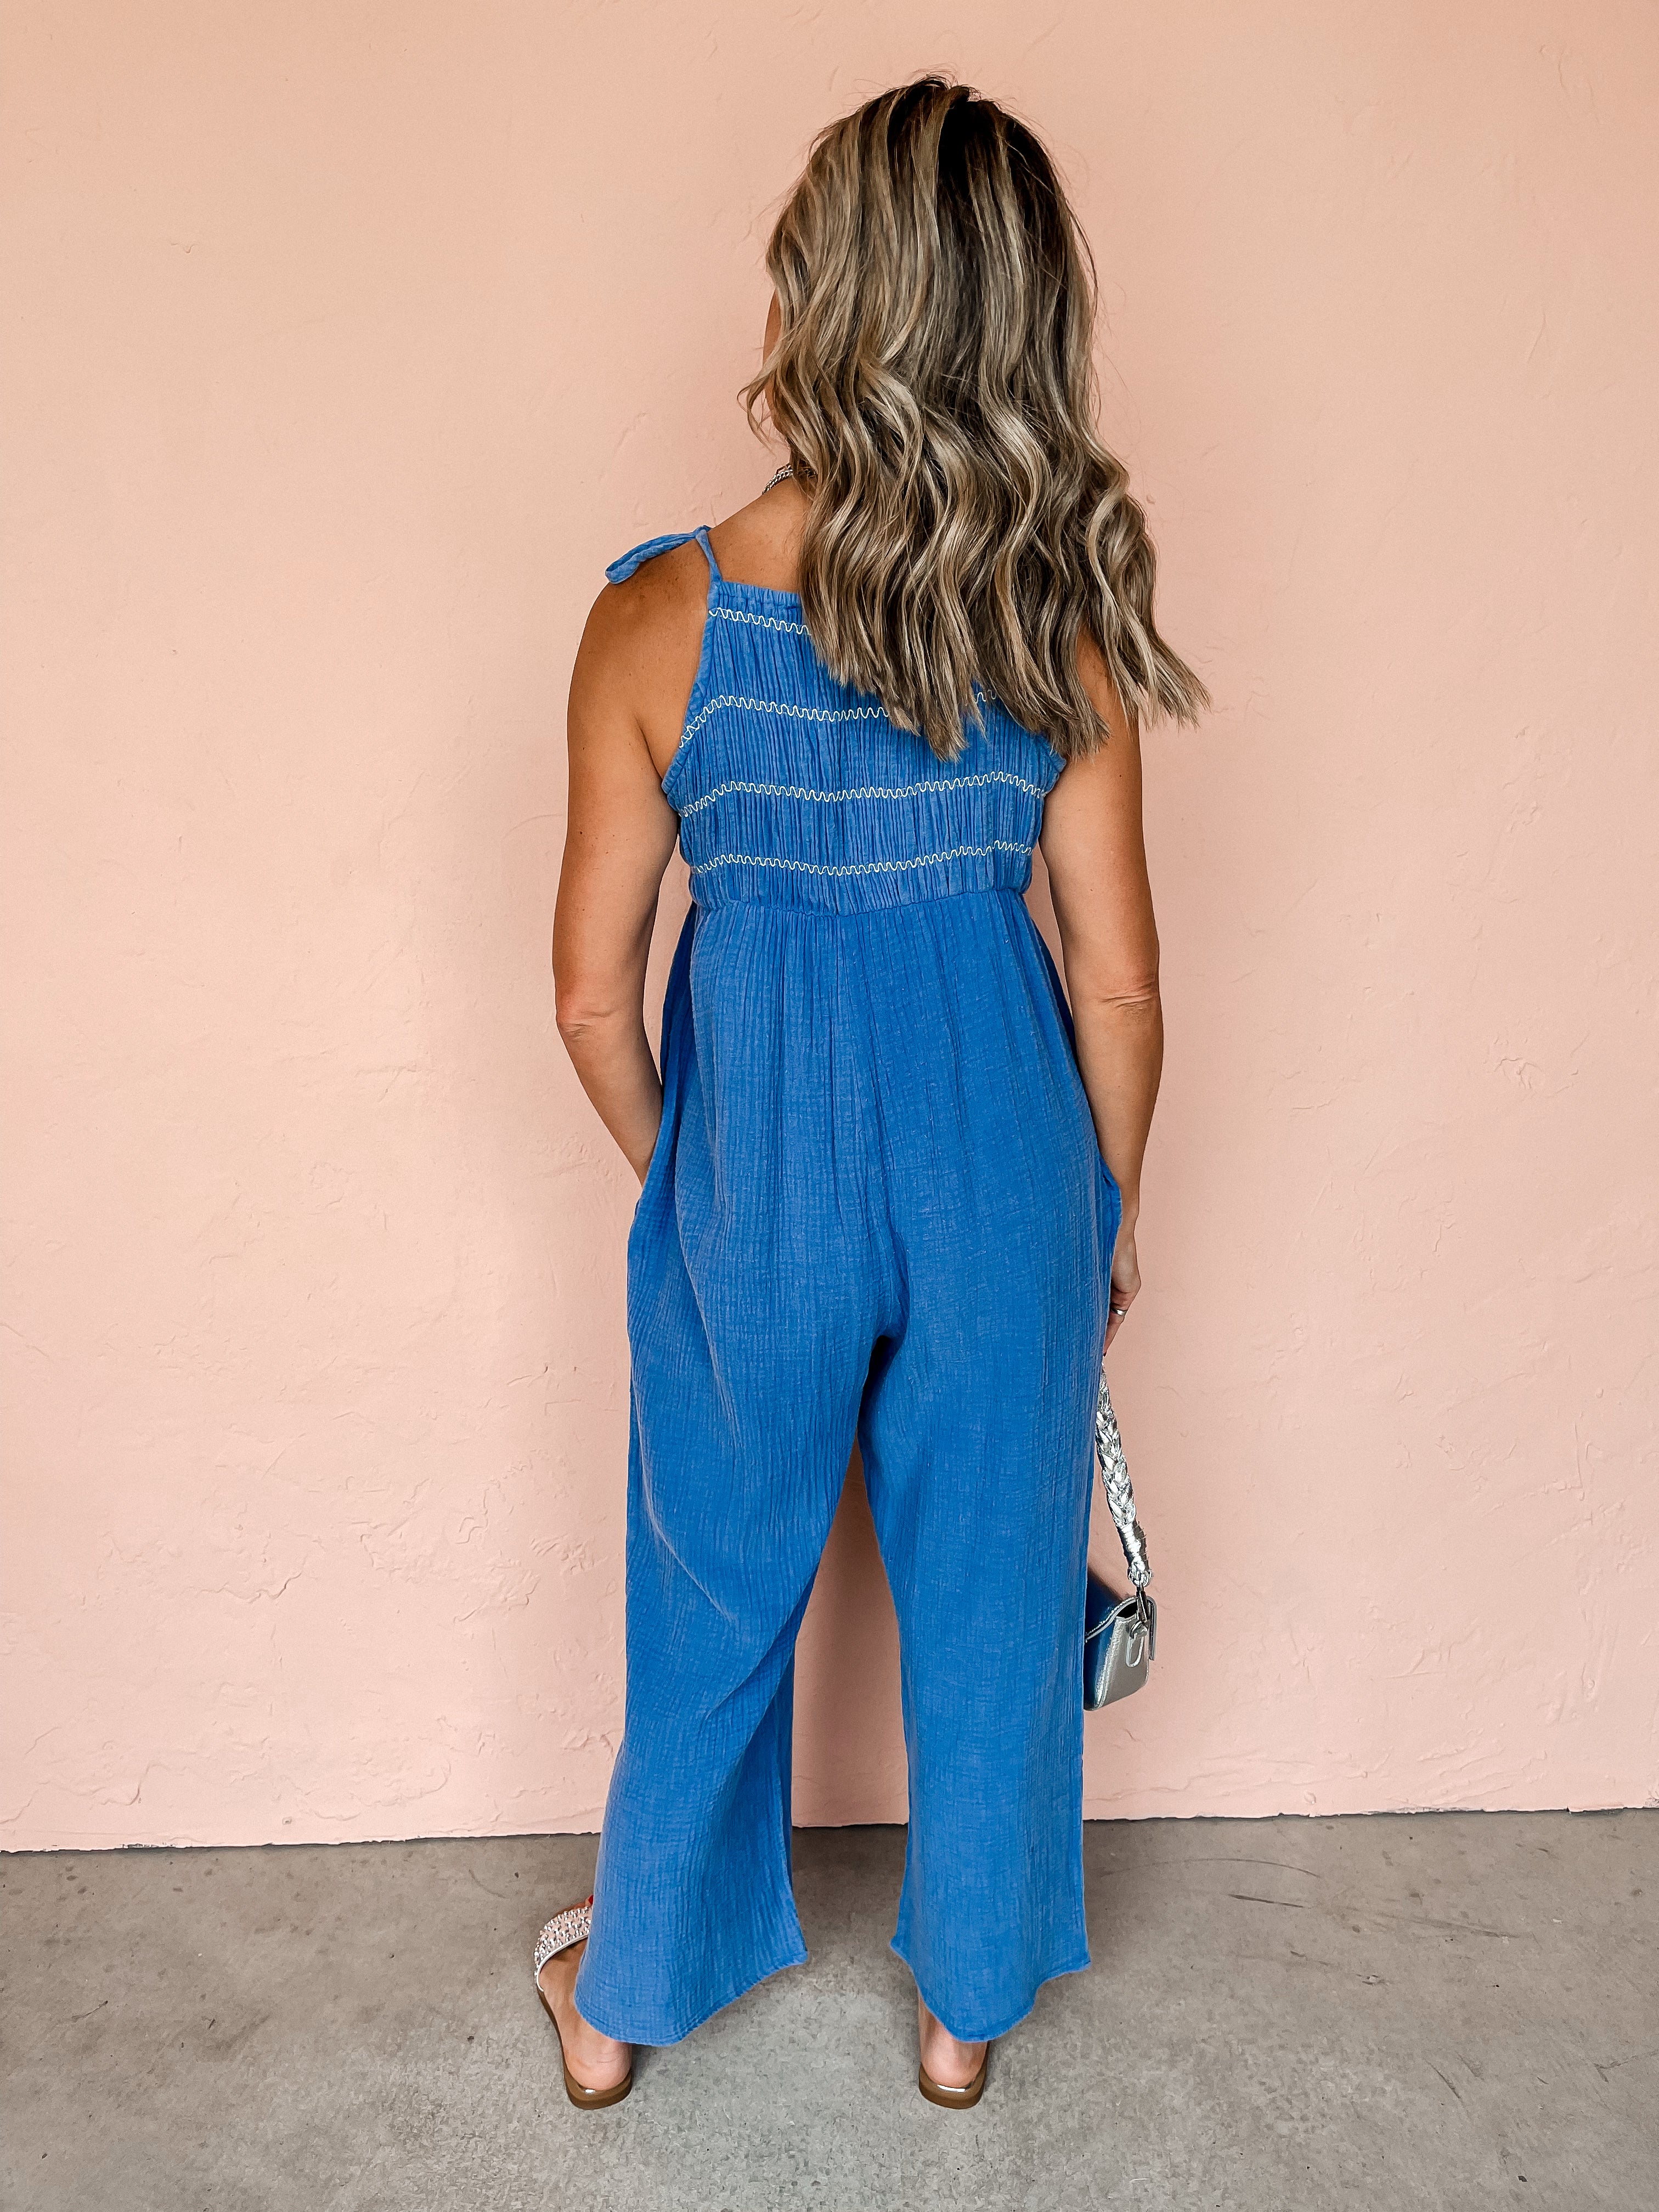 Up In The Clouds Cotton Gauze Jumpsuit